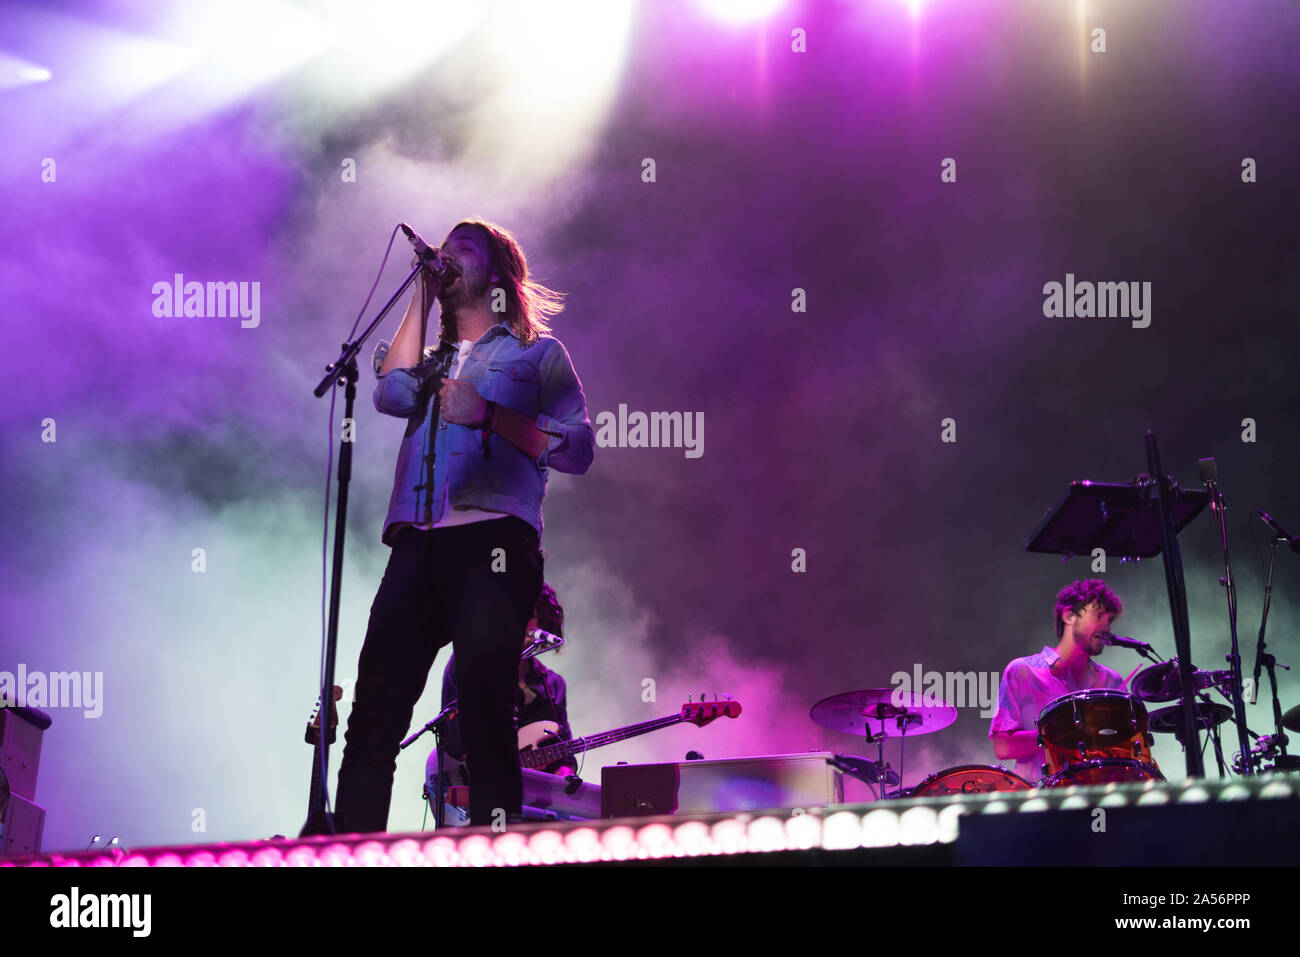 Denmark, Aarhus - June 6, 2019. The Australian musical project Tame Impala  performs a live concert during the Danish music festival Northside 2019 in  Aarhus. Here guitarist and musician Kevin Parker is